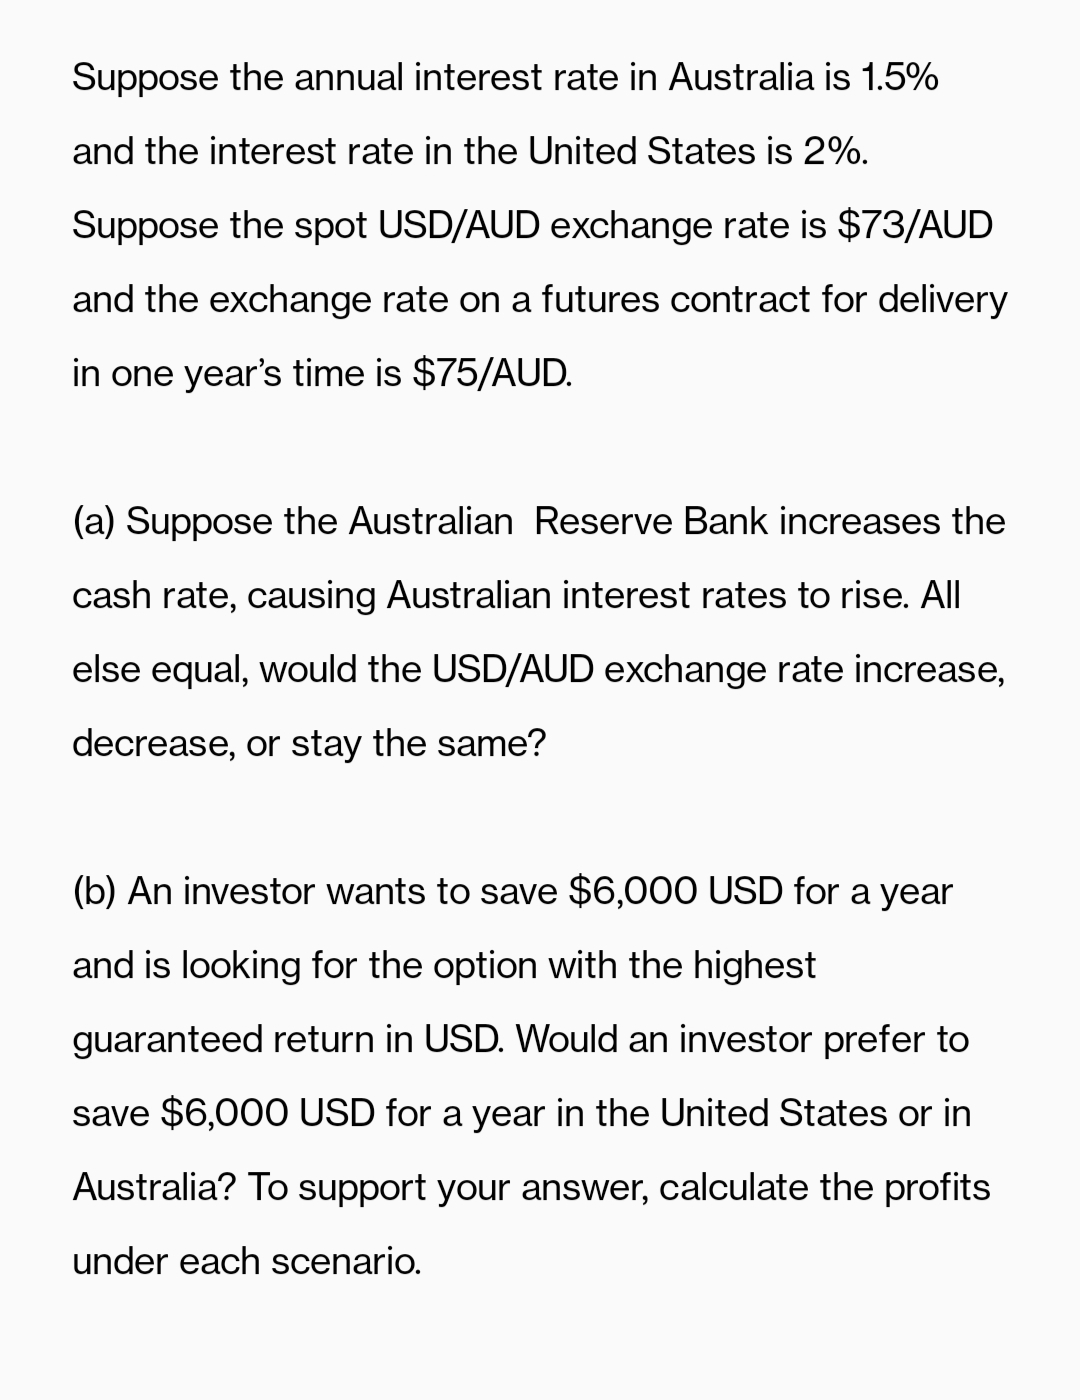 Suppose the annual interest rate in Australia is 1.5%
and the interest rate in the United States is 2%.
Suppose the spot USD/AUD exchange rate is $73/AUD
and the exchange rate on a futures contract for delivery
in one year's time is $75/AUD.
(a) Suppose the Australian Reserve Bank increases the
cash rate, causing Australian interest rates to rise. All
else equal, would the USD/AUD exchange rate increase,
decrease, or stay the same?
(b) An investor wants to save $6,000 USD for a year
and is looking for the option with the highest
guaranteed return in USD. Would an investor prefer to
save $6,000 USD for a year in the United States or in
Australia? To support your answer, calculate the profits
under each scenario.